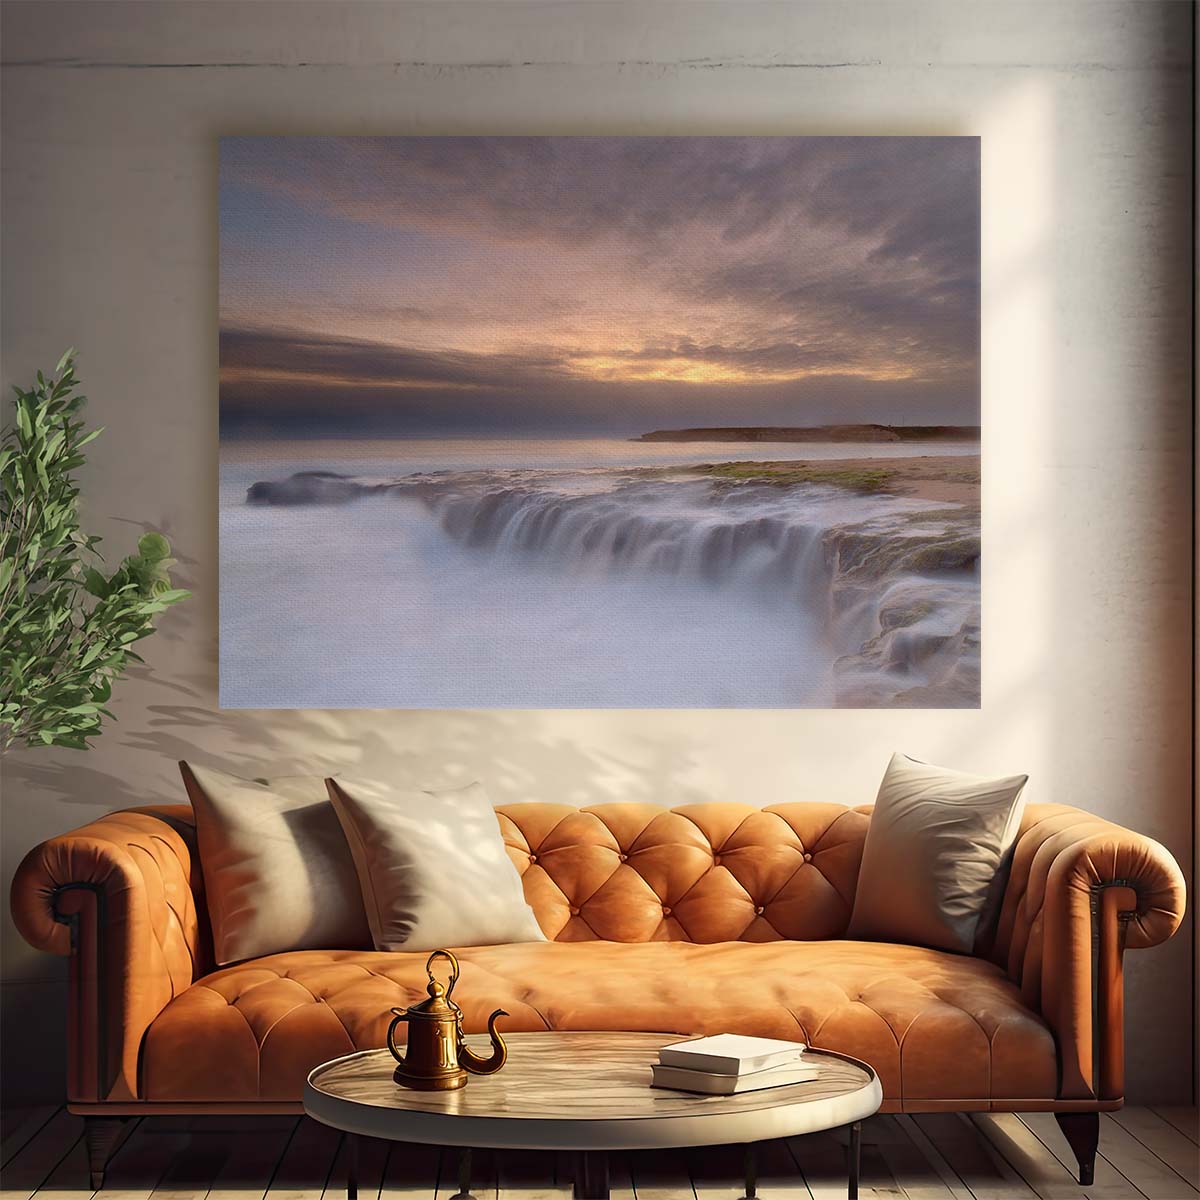 Serene Waterfall & Sunset Seascape Long Exposure Wall Art by Luxuriance Designs. Made in USA.